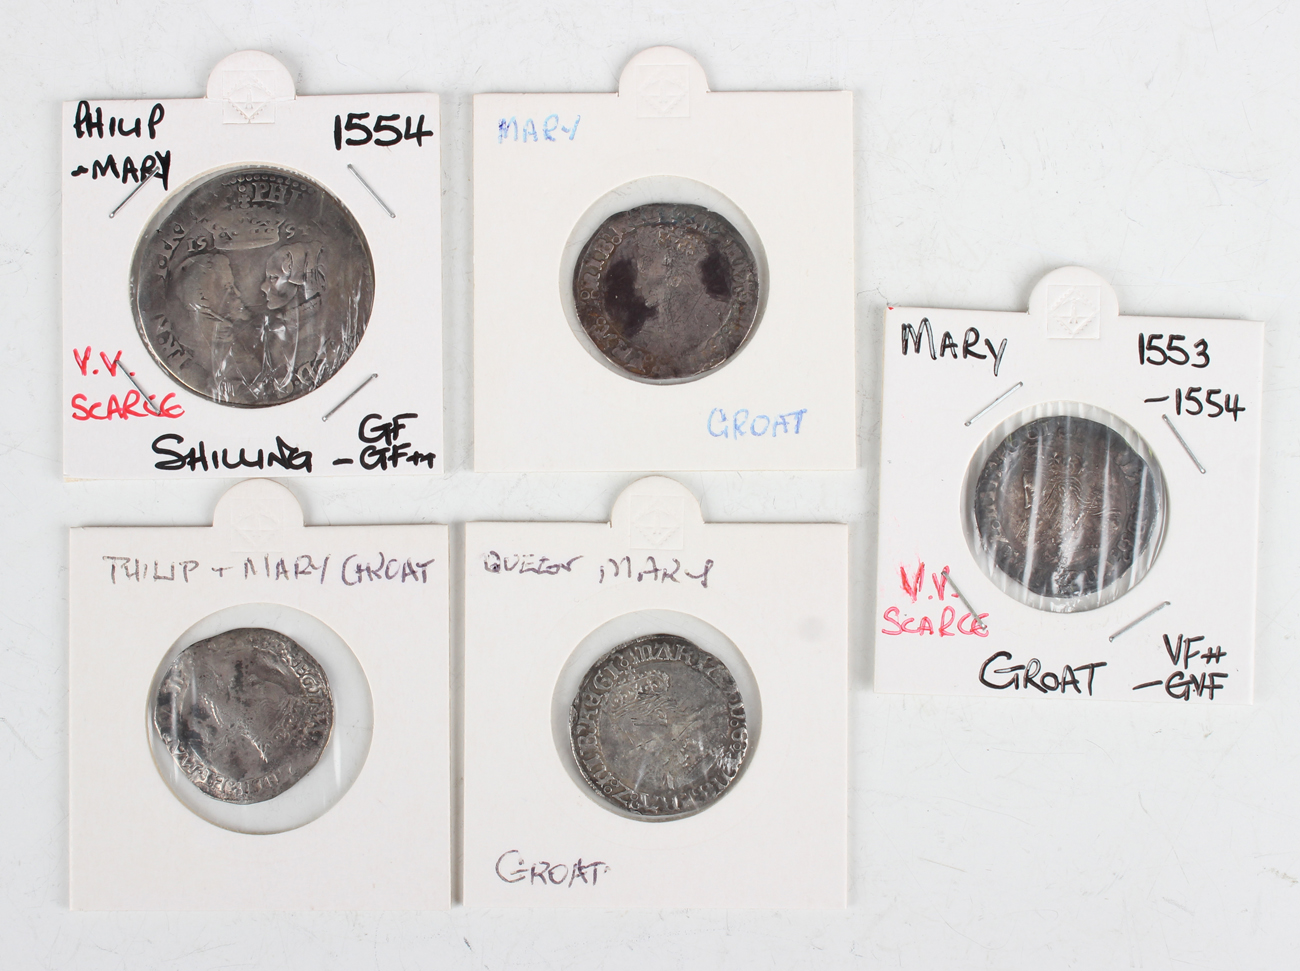 A Philip and Mary hammered shilling 1554, a Philip and Mary groat and three Queen Mary groats.